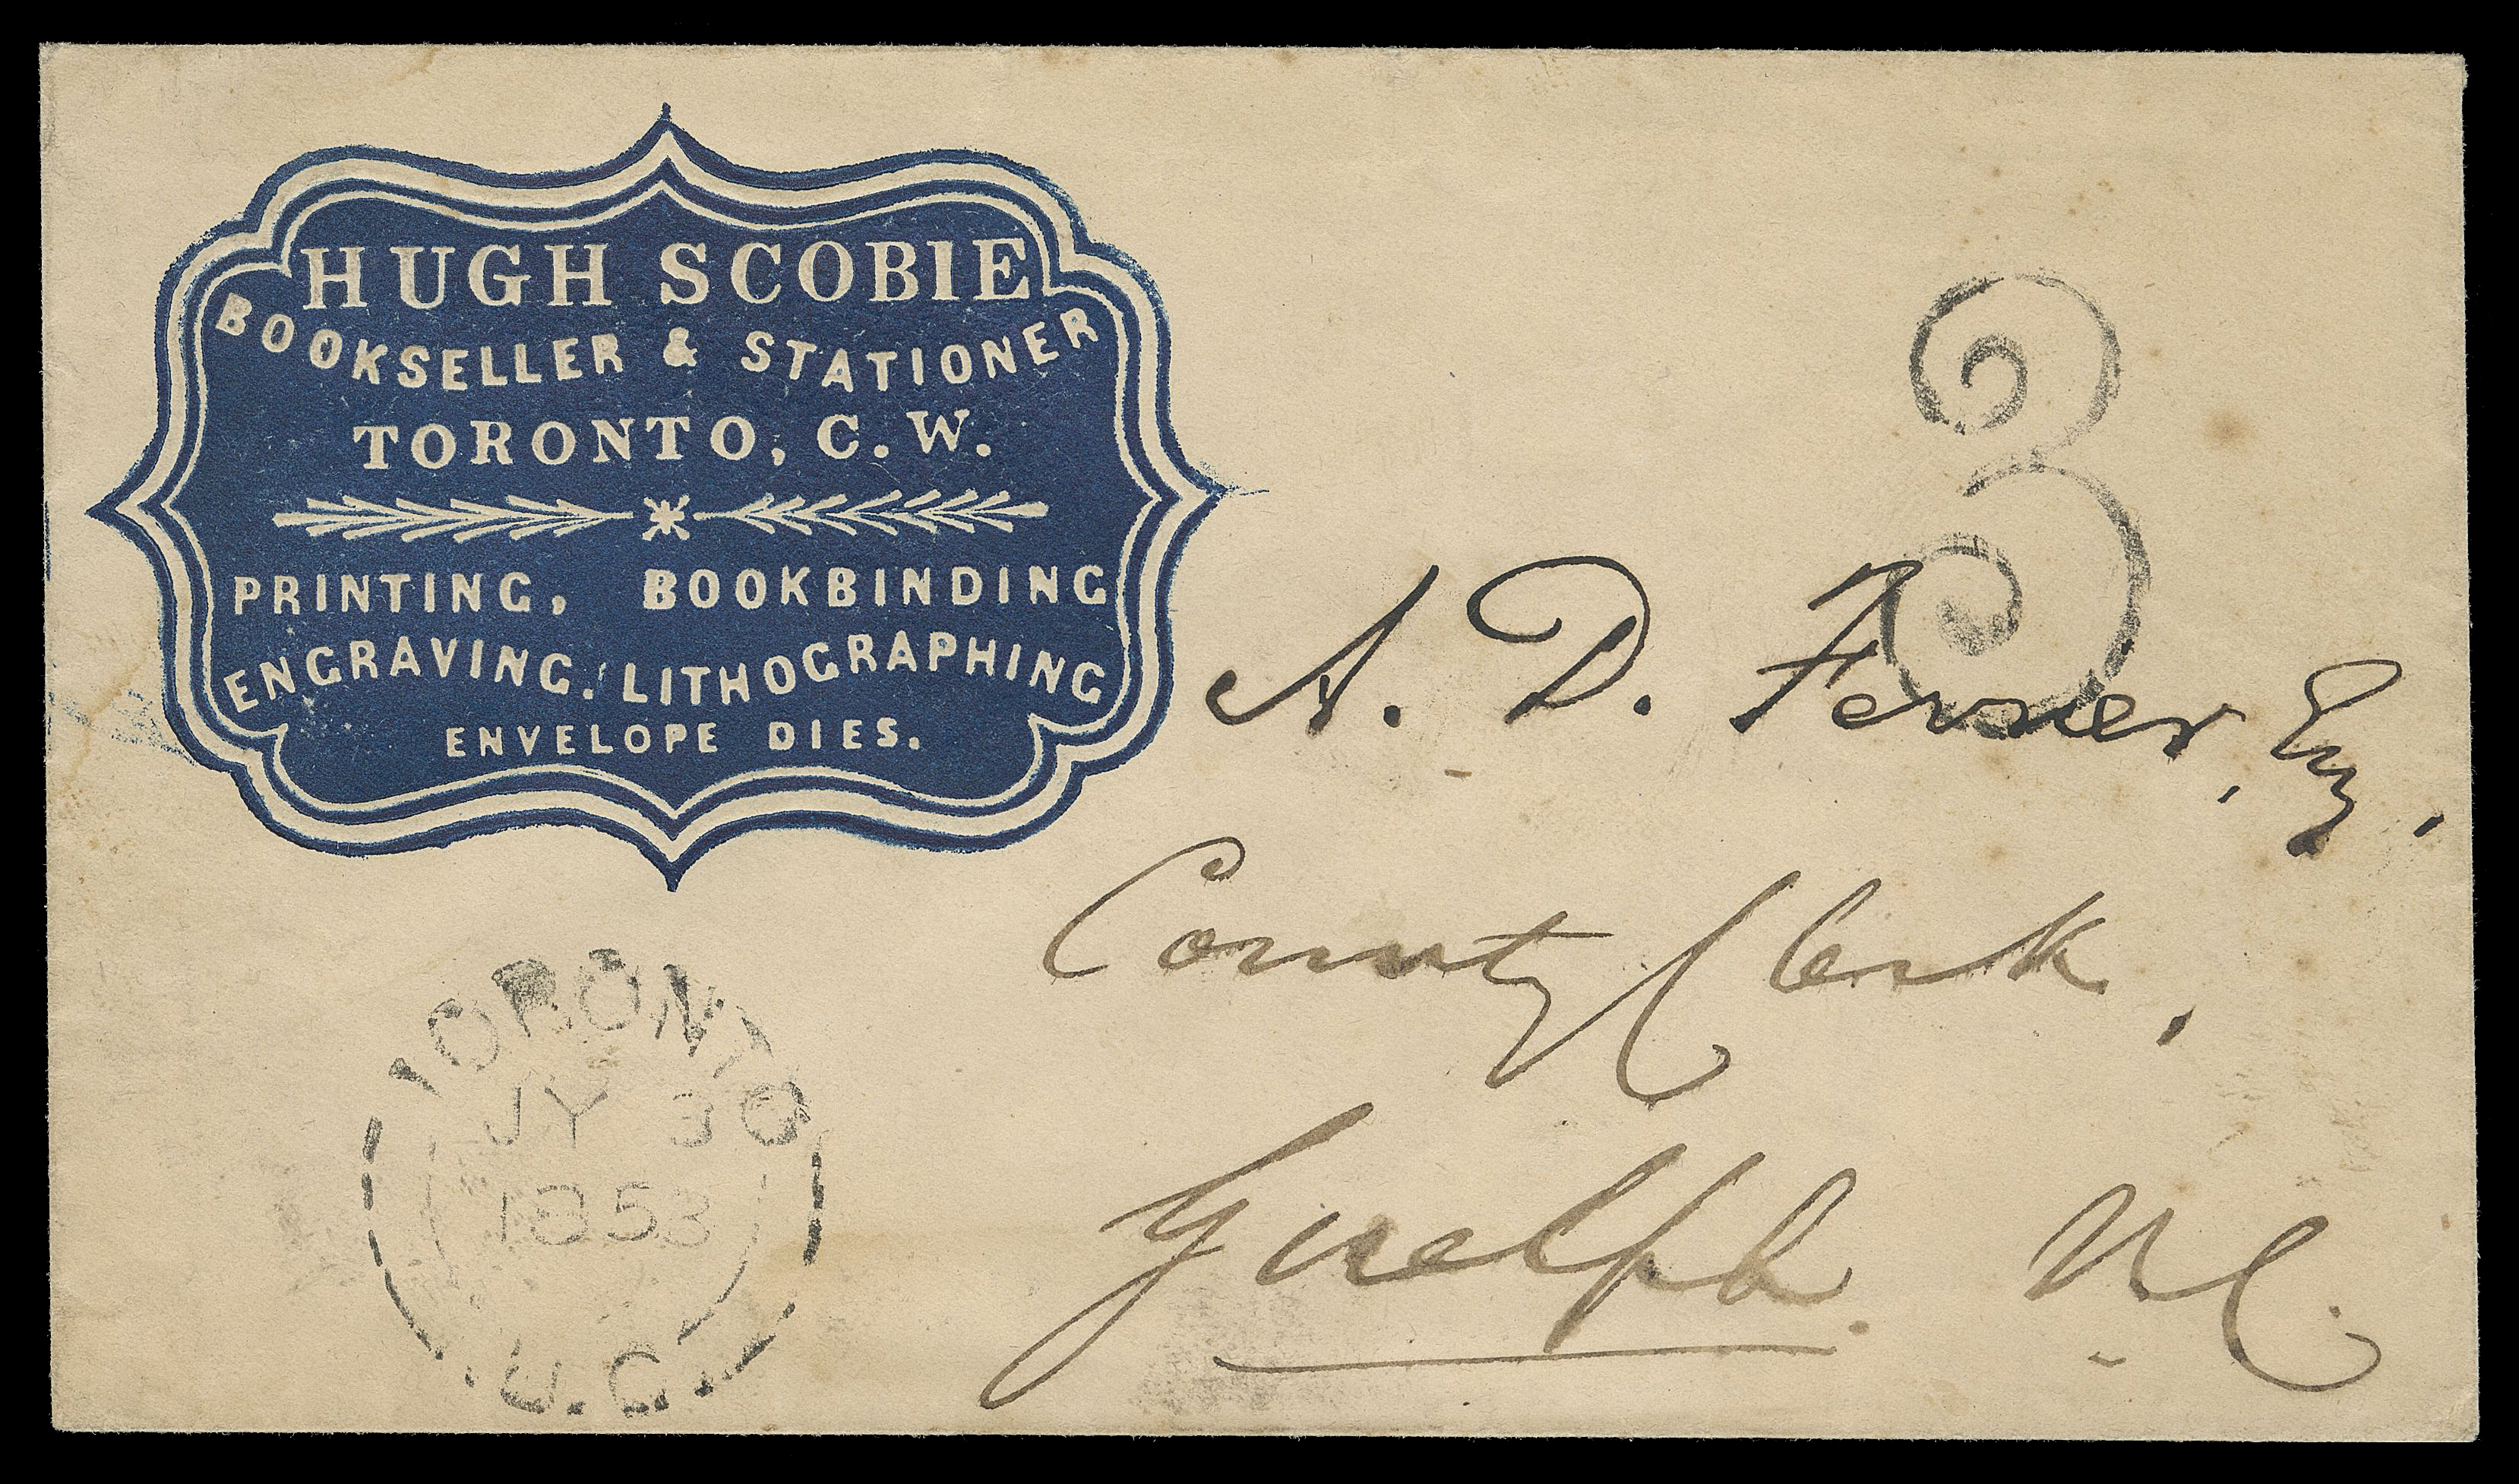 THREE PENCE AND FIVE CENTS  1853 (July 3) Dark blue embossed cameo "Hugh Scobie, Bookseller & Stationer, Printing, Bookbinding, Engraving, Lithographing Envelope Dies" advertising envelope, large "3" rate handstamp (to collect), mailed from Toronto with double arc dispatch at left and partial Guelph receiver backstamp. An attractive and early Cameo embossed advertising cover, VF

Provenance: Vincent G. Greene Collection with his backstamp

Hugh Scobie, lithographer of Toronto, may have played an instrumental part in the famous Sir Sandford Fleming 3p Venetian Red essay, which is attributed to printers Ellis of Toronto. The essay may have been prepared by Scobie, under the direction of Postmaster General Morris.
